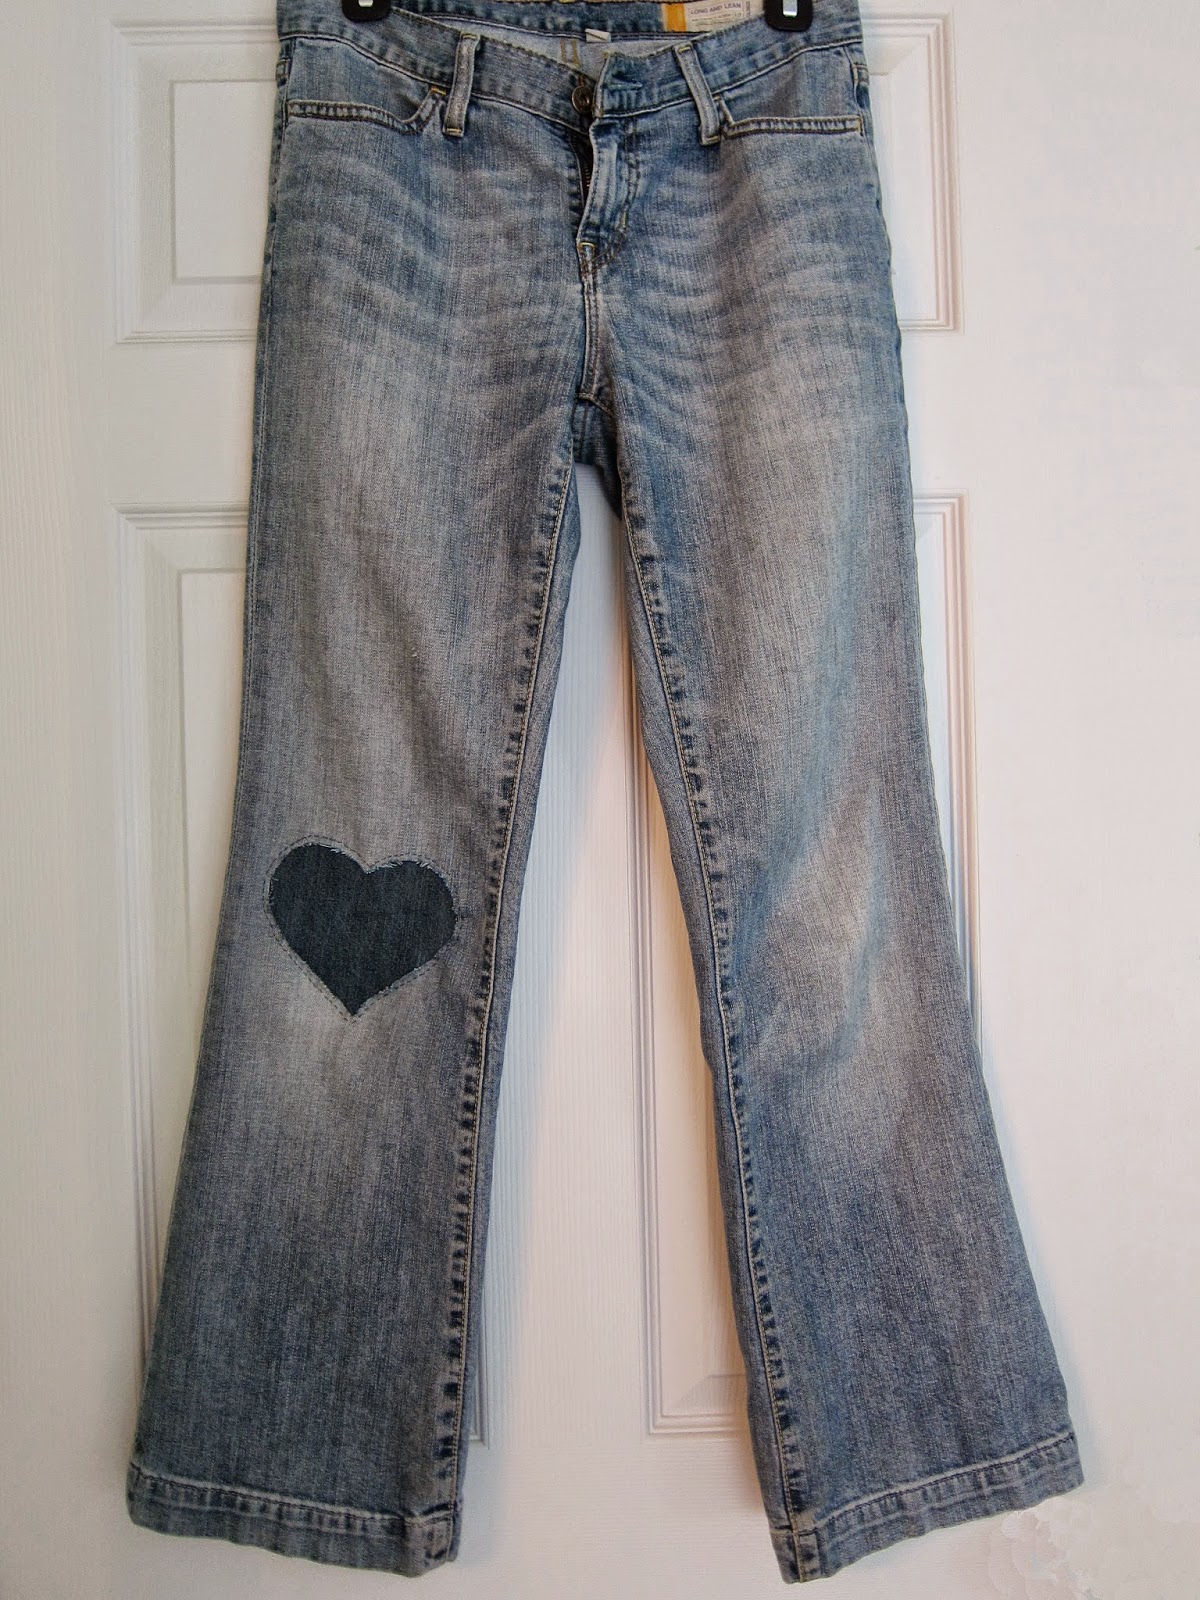 Brushstrokes & Bottlecaps: Upcycled Patchwork Jeans #2